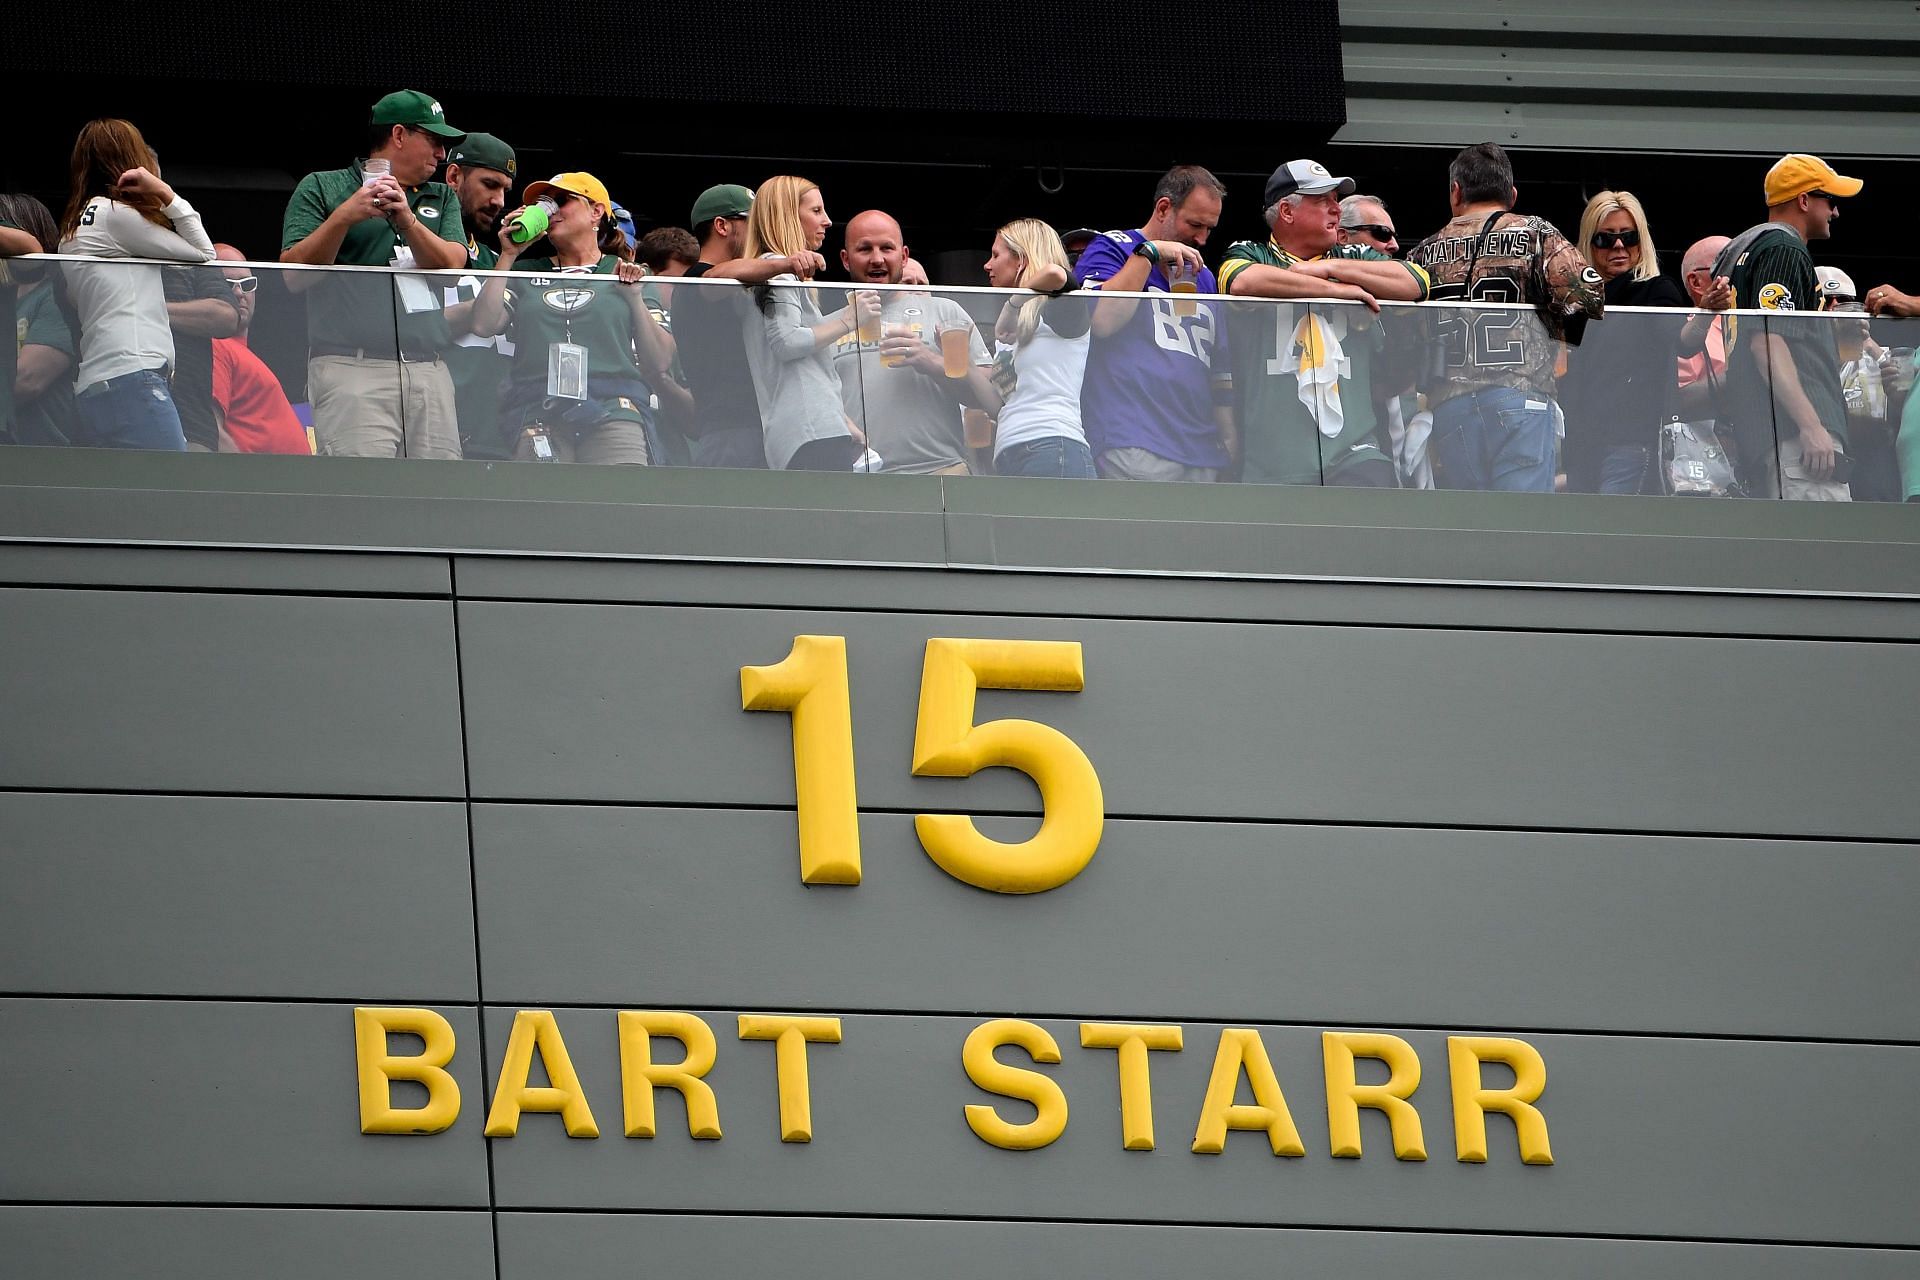 Bart Starr put the Packers on the map